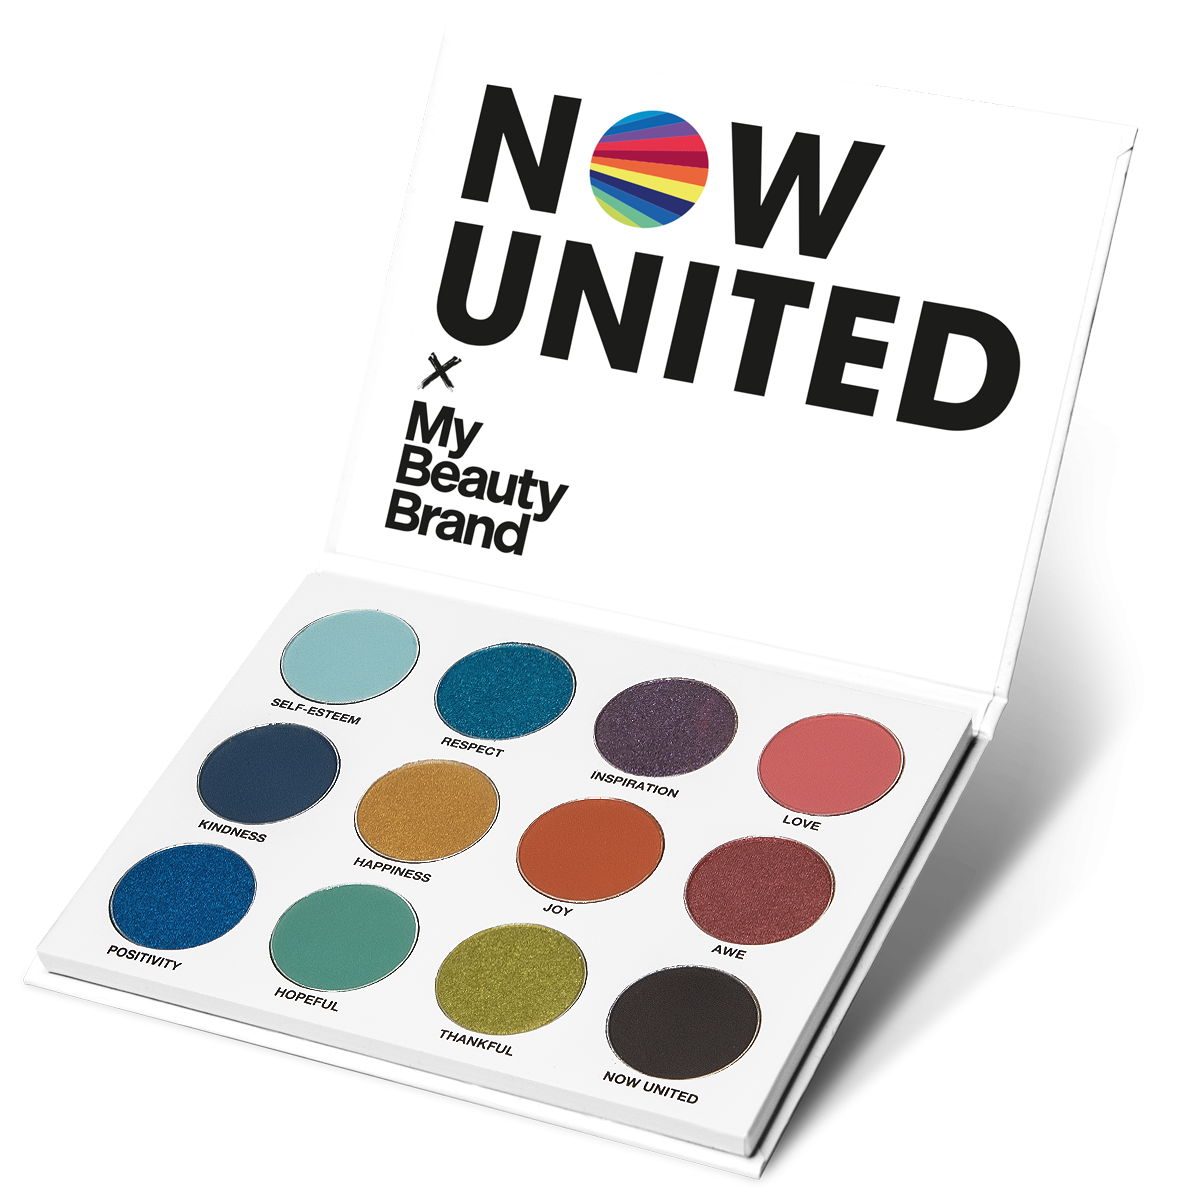 This limited-edition palette was developed by the stars of Now United x MyBeautyBrand with color inspiration taken from Colors Speak. Colors Speak reflects the values close to their heart, from respect and kindness to joy and awe. The palette does more than just look amazing. The 12 expertly formulated high-pigment matte and shimmer shades have been created with the finest Italian ingredients worthy of beauty industry envy. Each of these shades were created to shine bright on their own or used together; to have fun with and to feel good in. Brush or fingertips, expert or amateur, this palette has something for everyone to enjoy. Bonus points: 100% Vegan